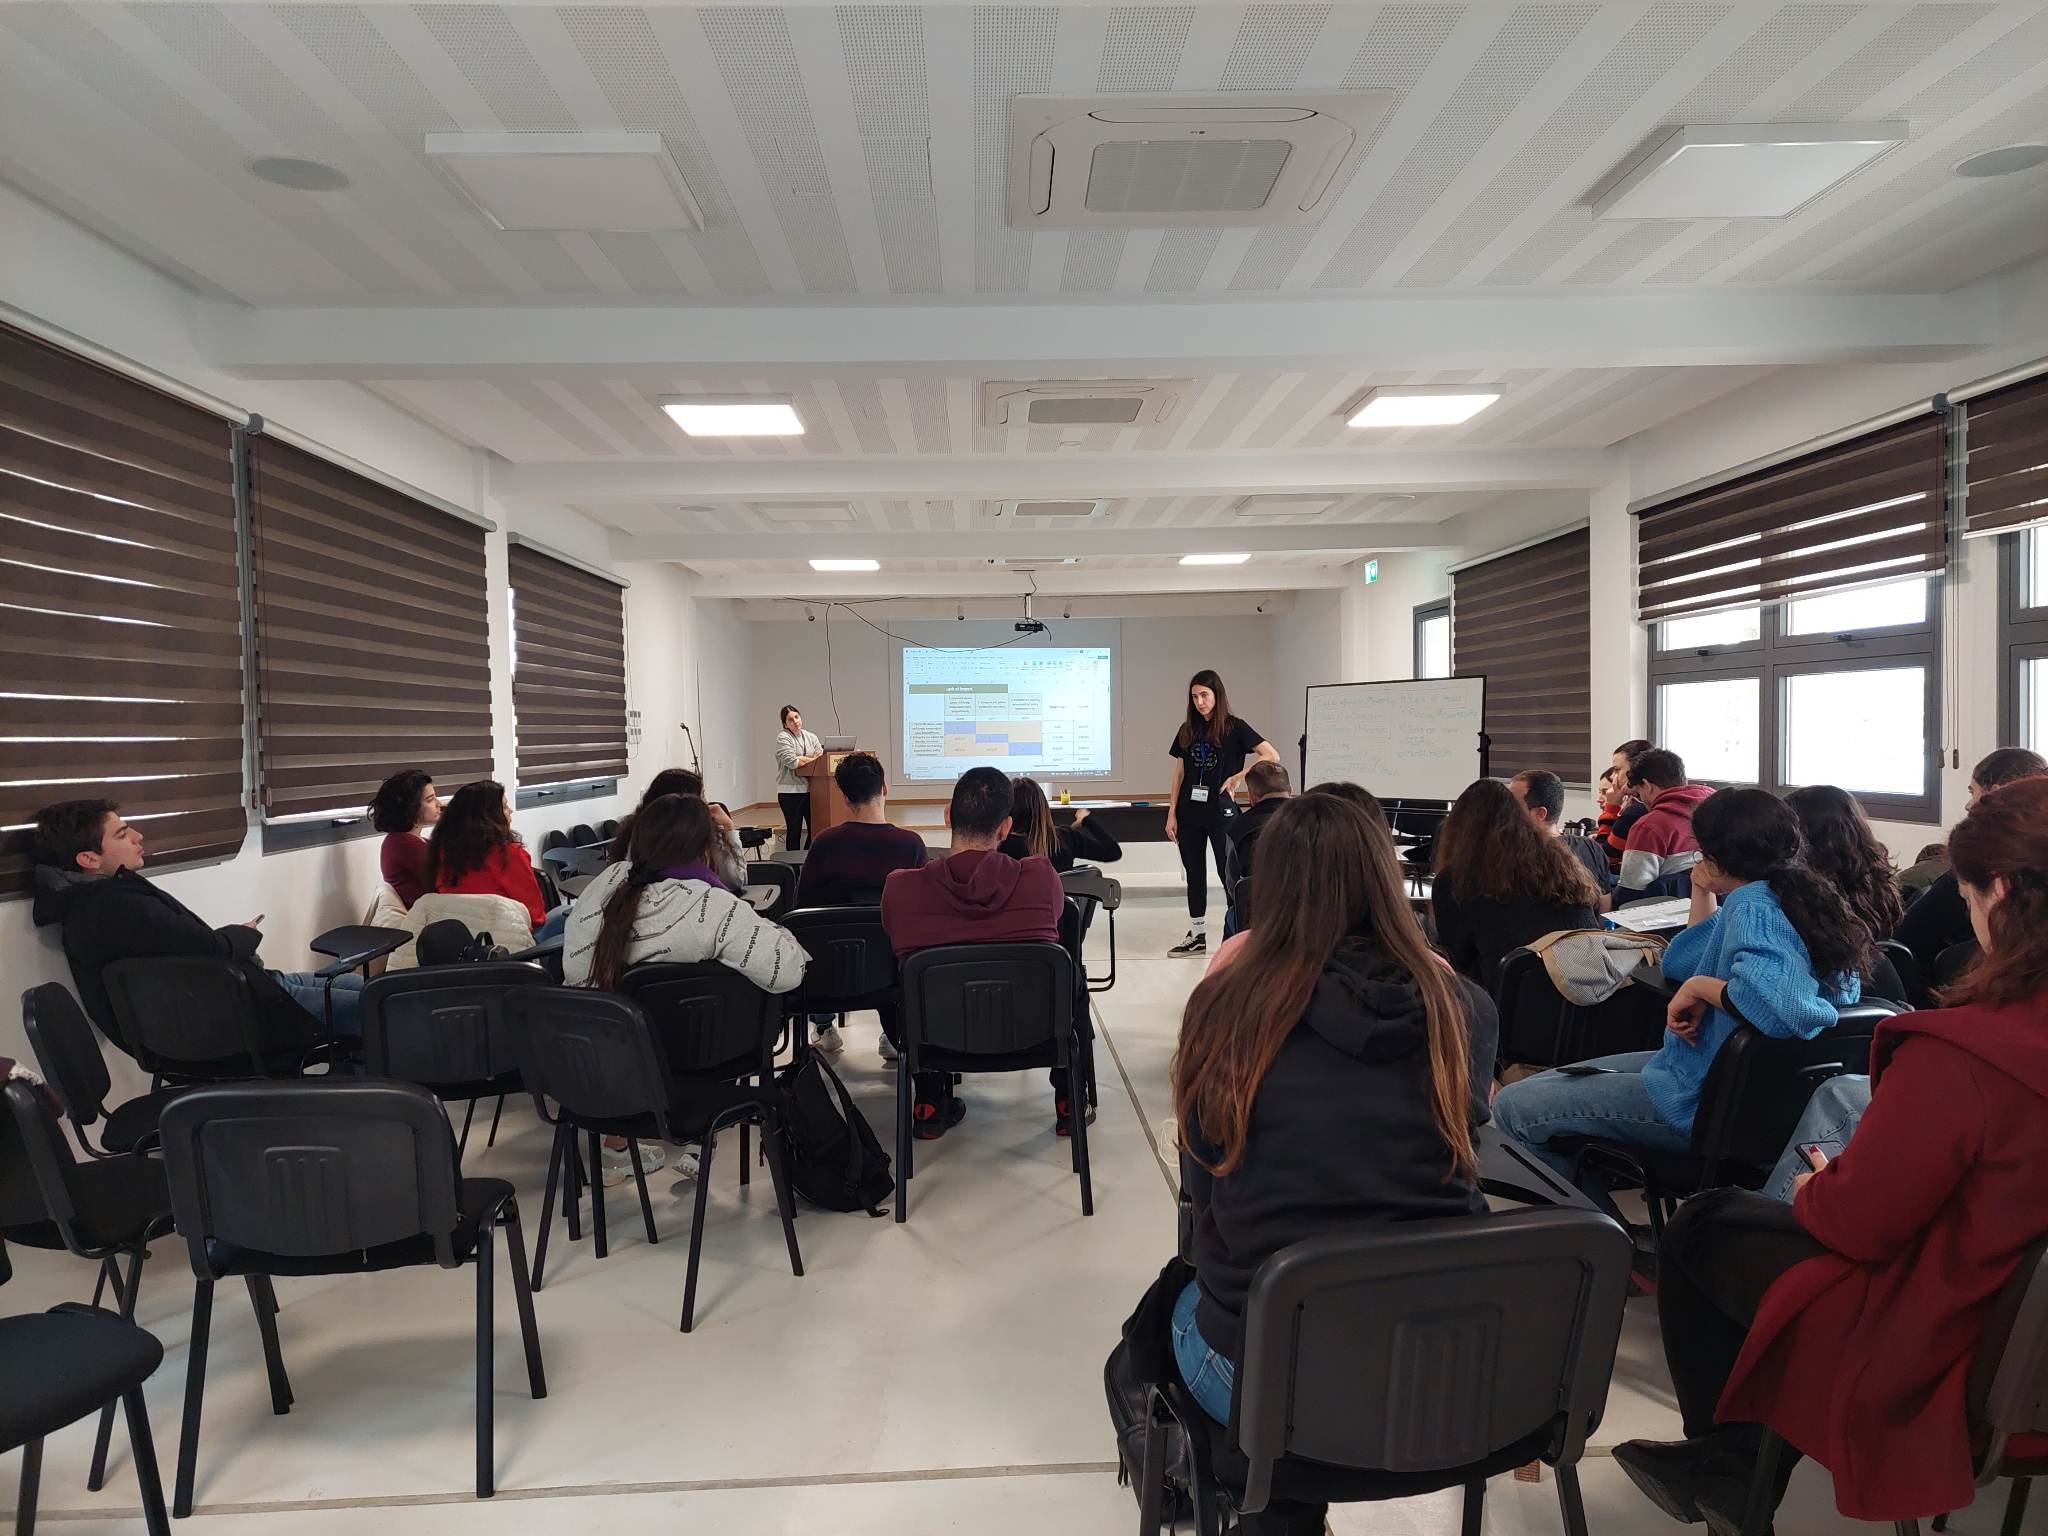 The 1st workshop of the “Active Minds” project was successfully completed in Kathikas